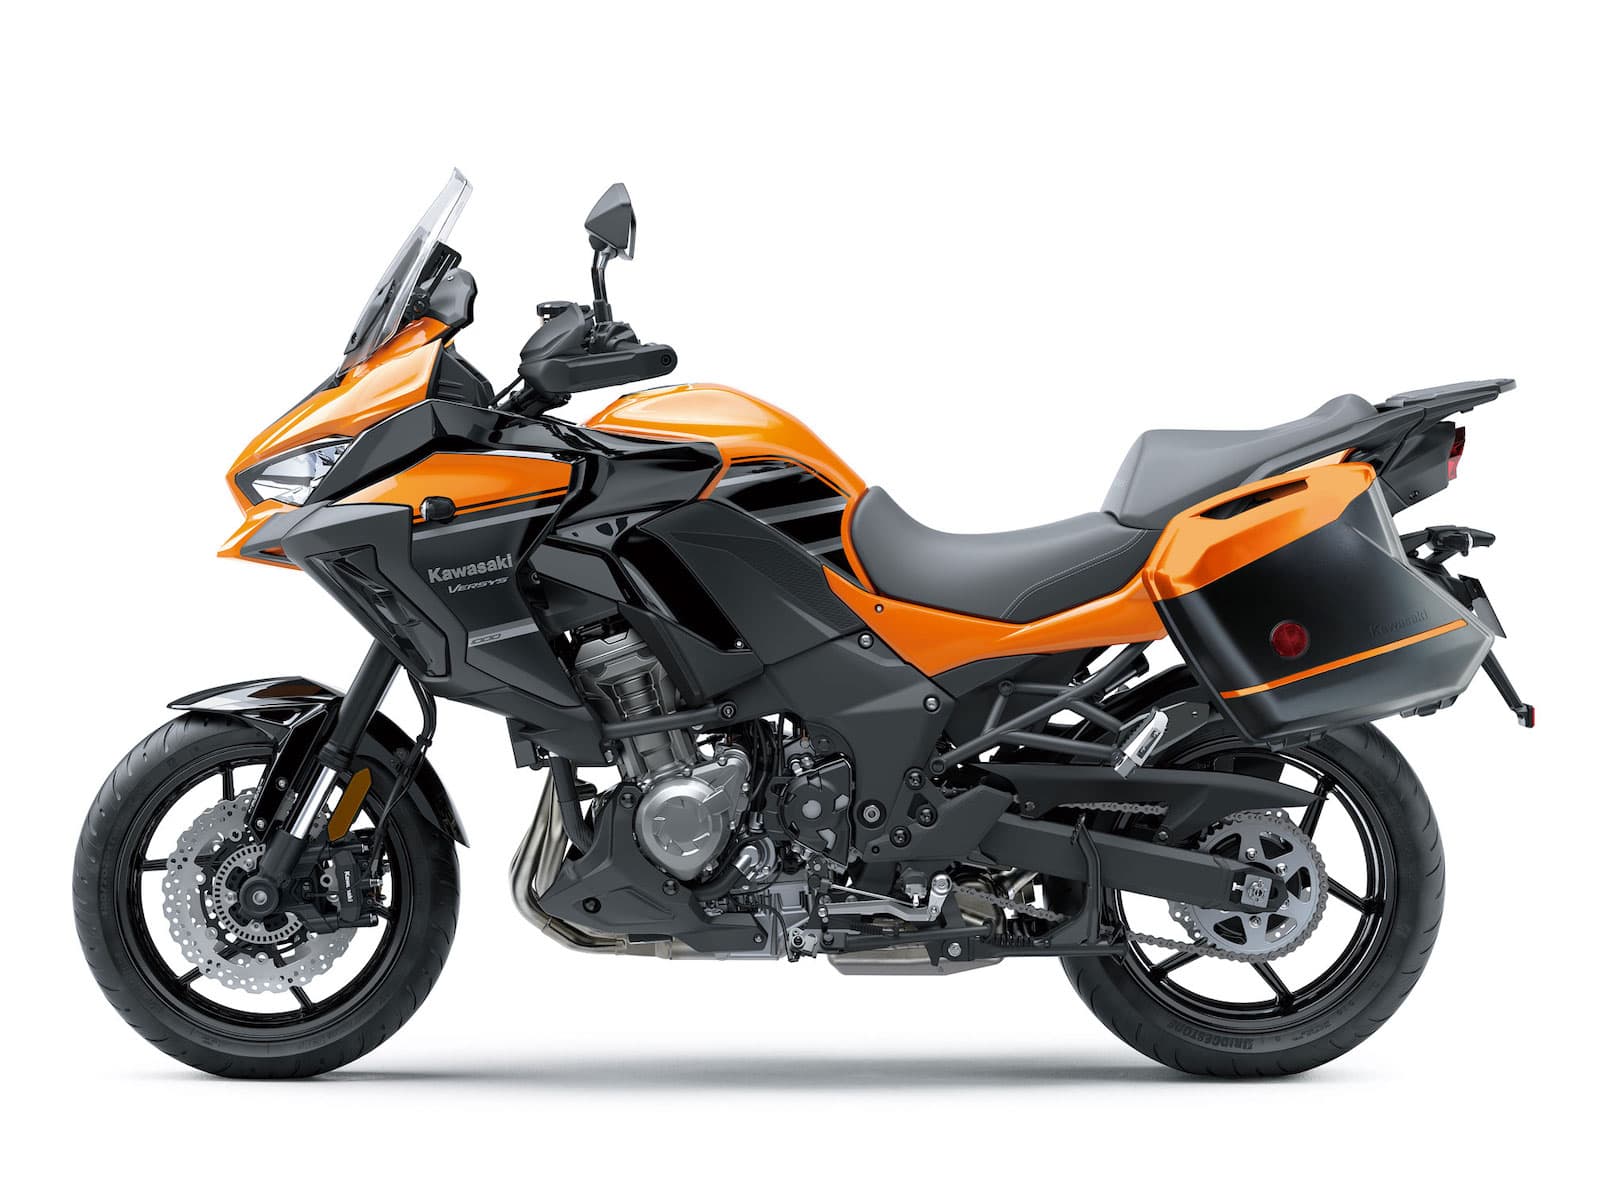 LHS 2019 Versys 1000 orange with luggage